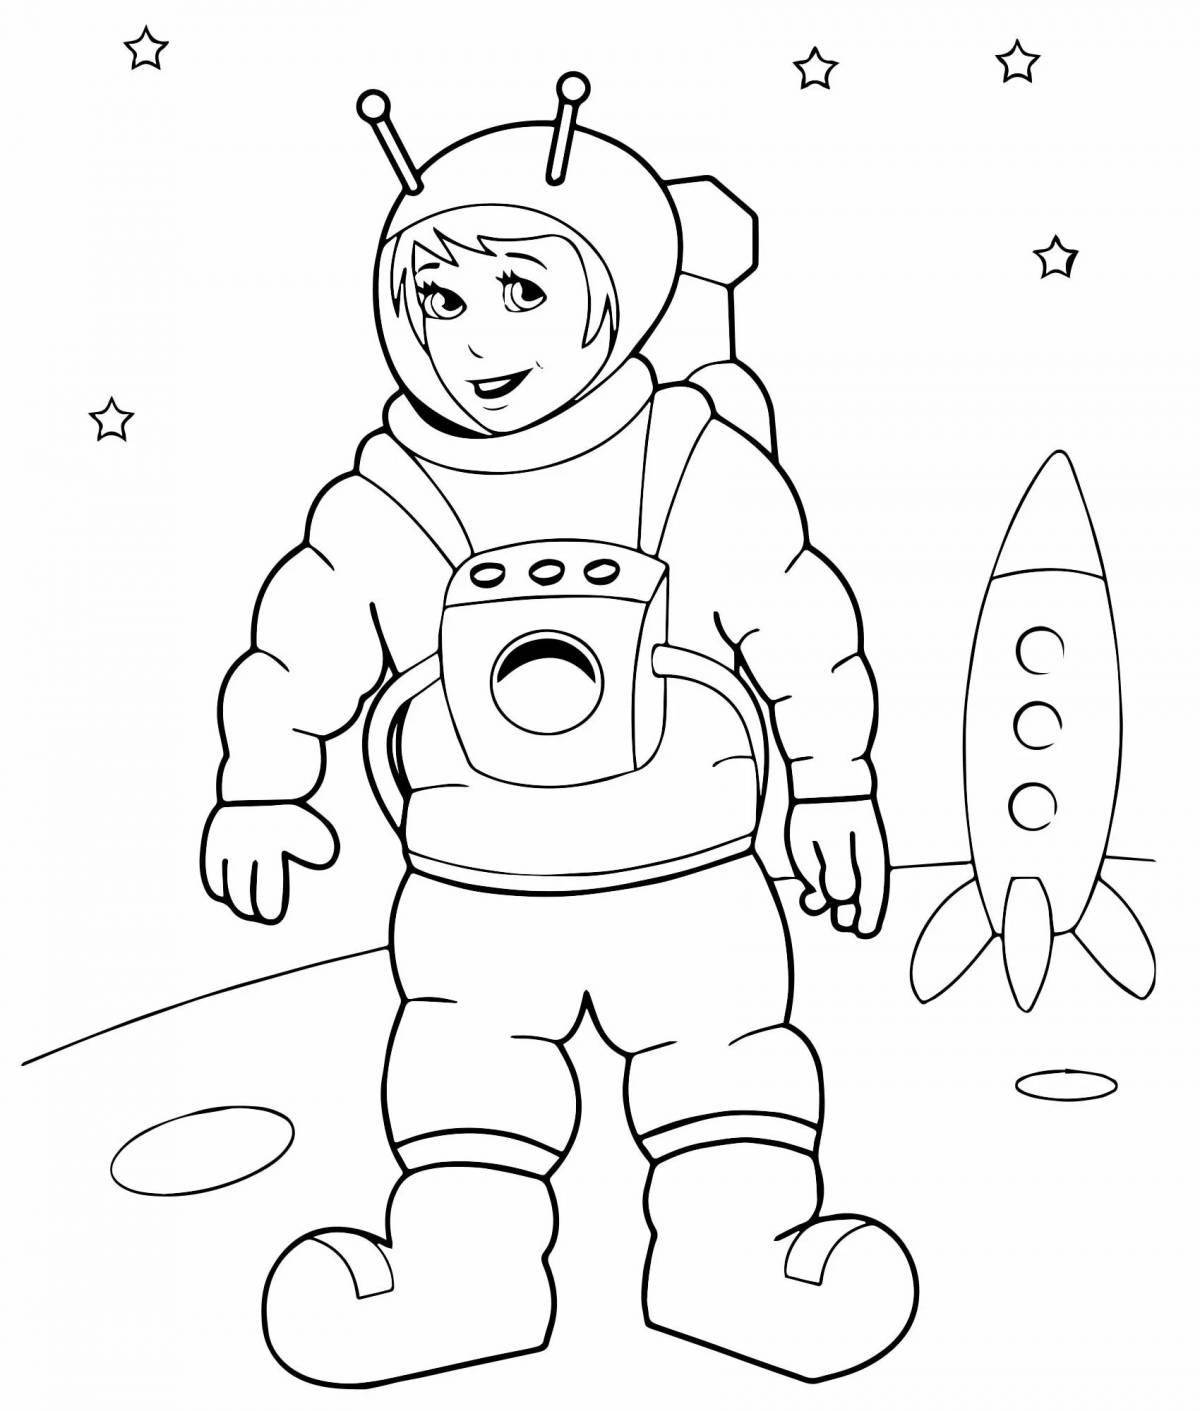 Dynamic astronaut with space robot arm coloring page